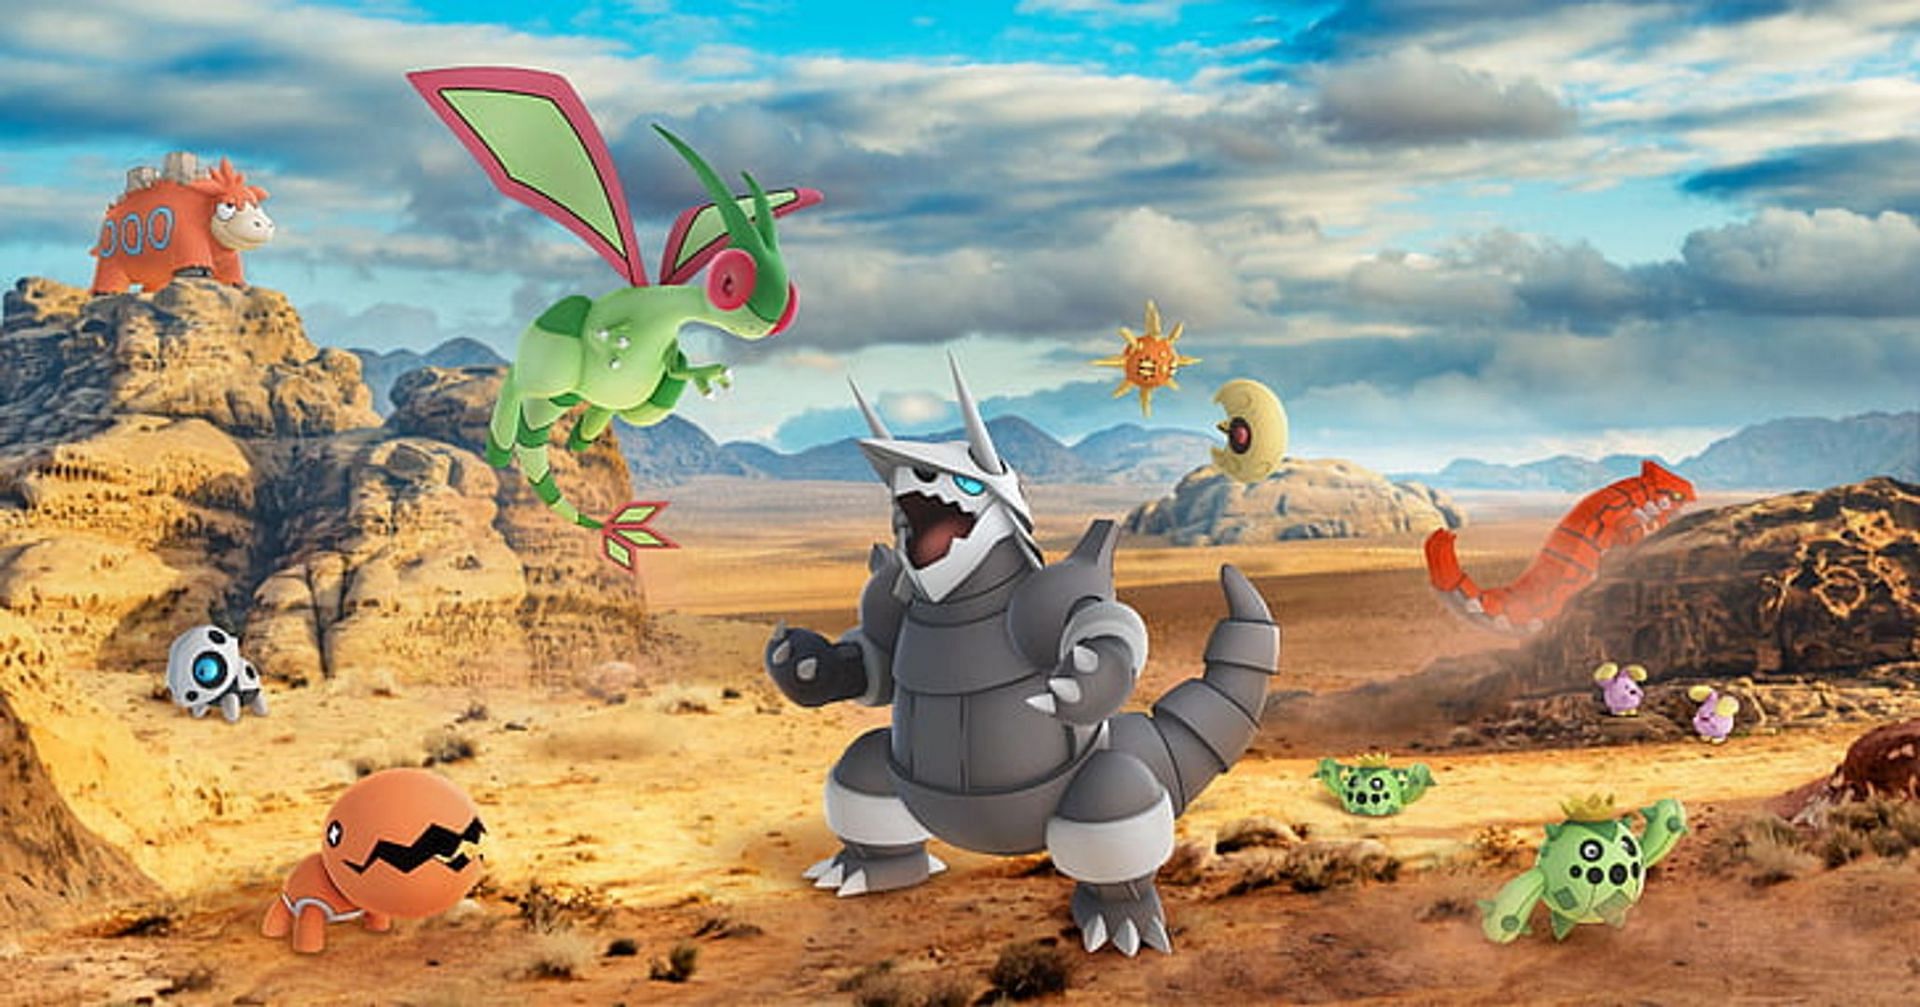 Aggron as it appears in promotional imagery for Pokemon GO (Image via Niantic)